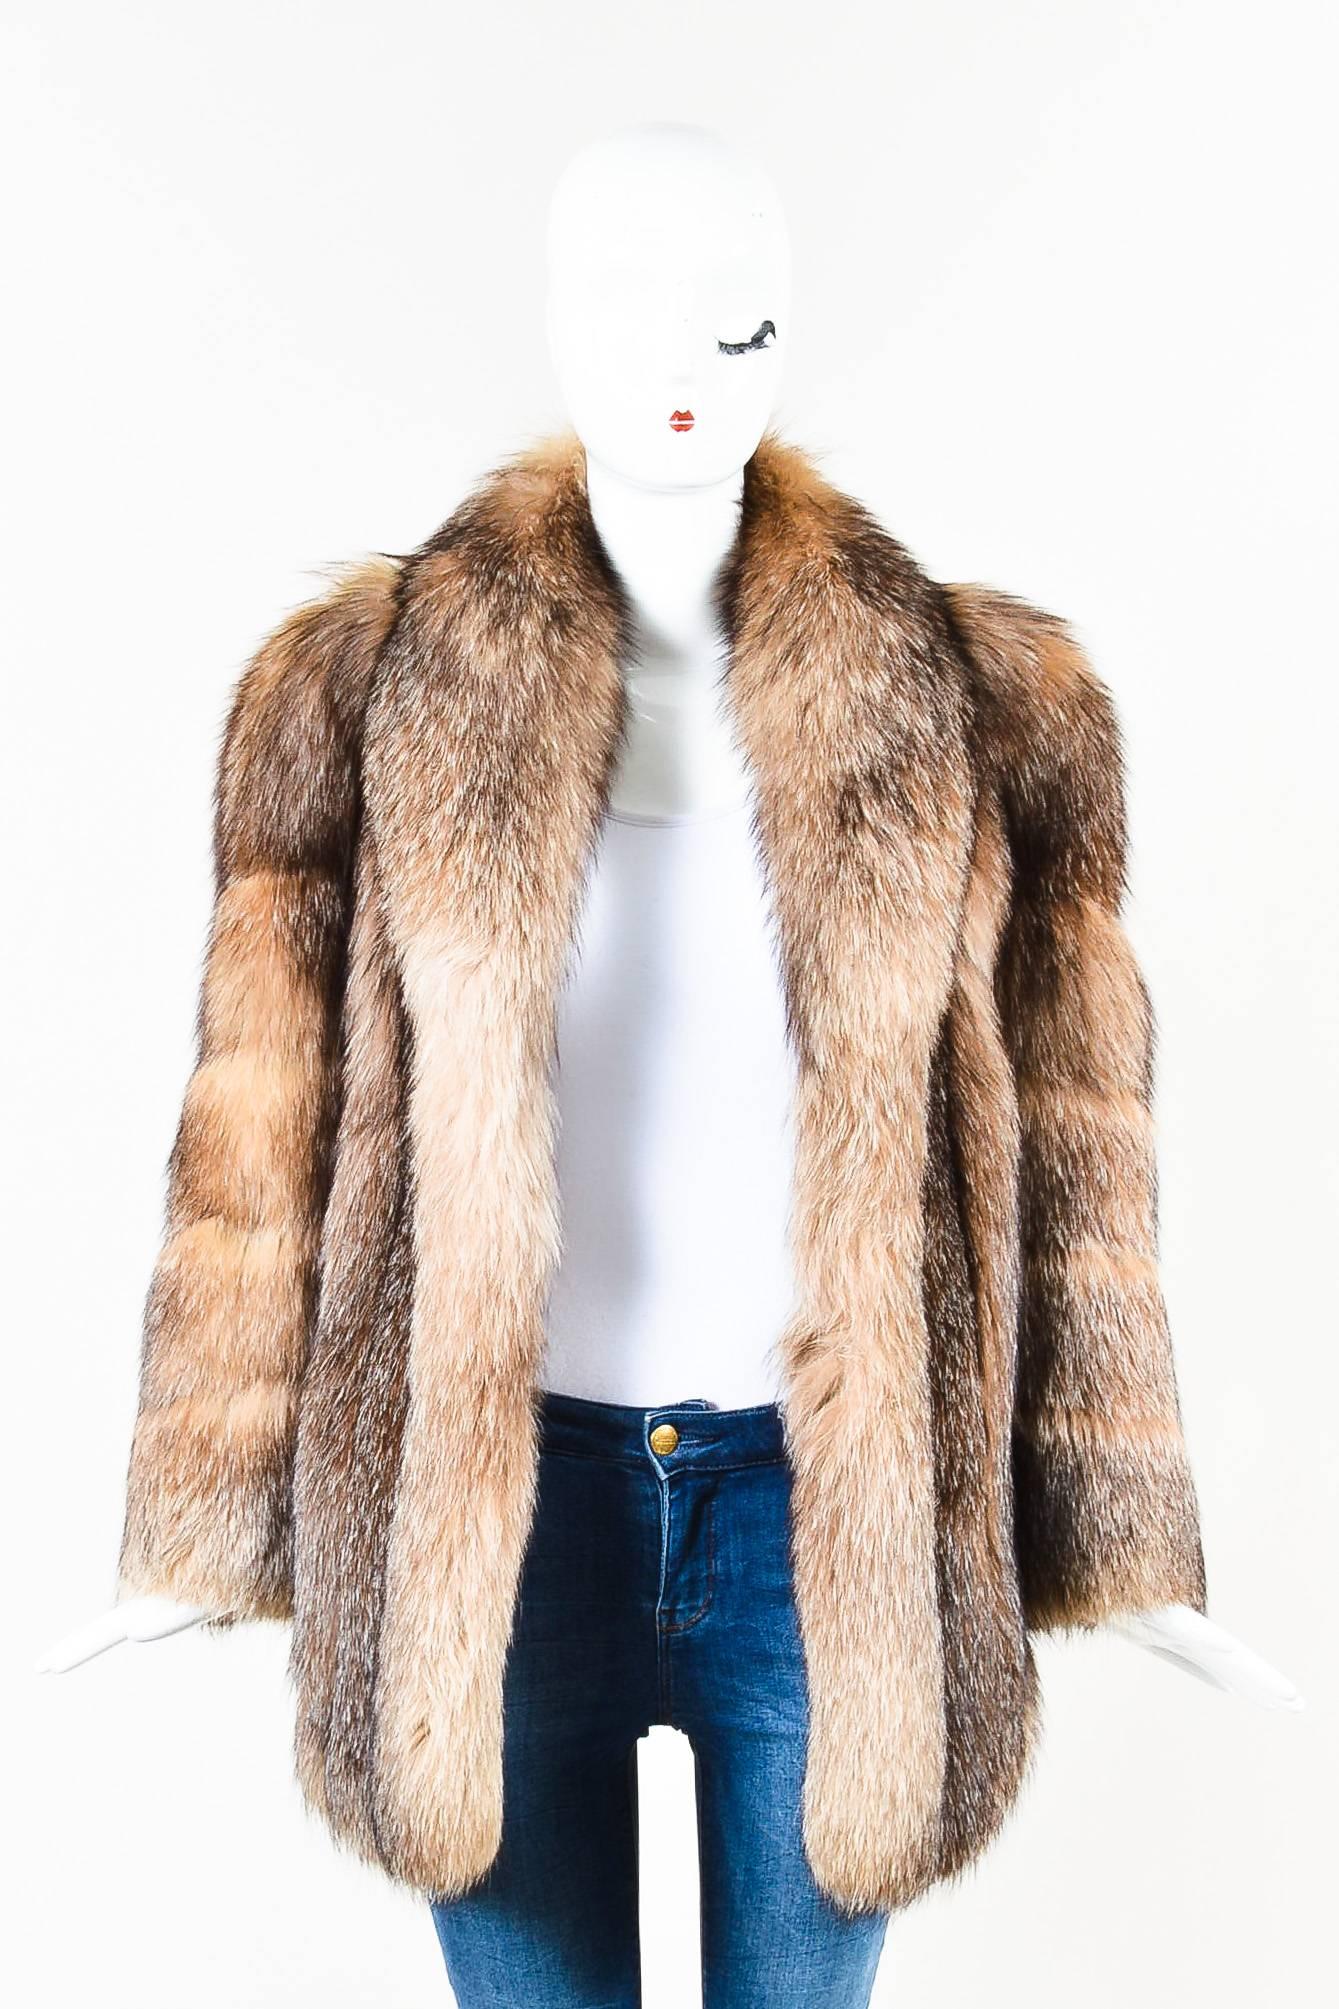 Vintage Lanvin at the Evans Collection luxurious and plush fur coat in multicolor tawny brown. Shawl collar. Long sleeves and shorter length for more modern fit. Fully lined and hook-and-eye closure.

Measurements:
Total Length: 30